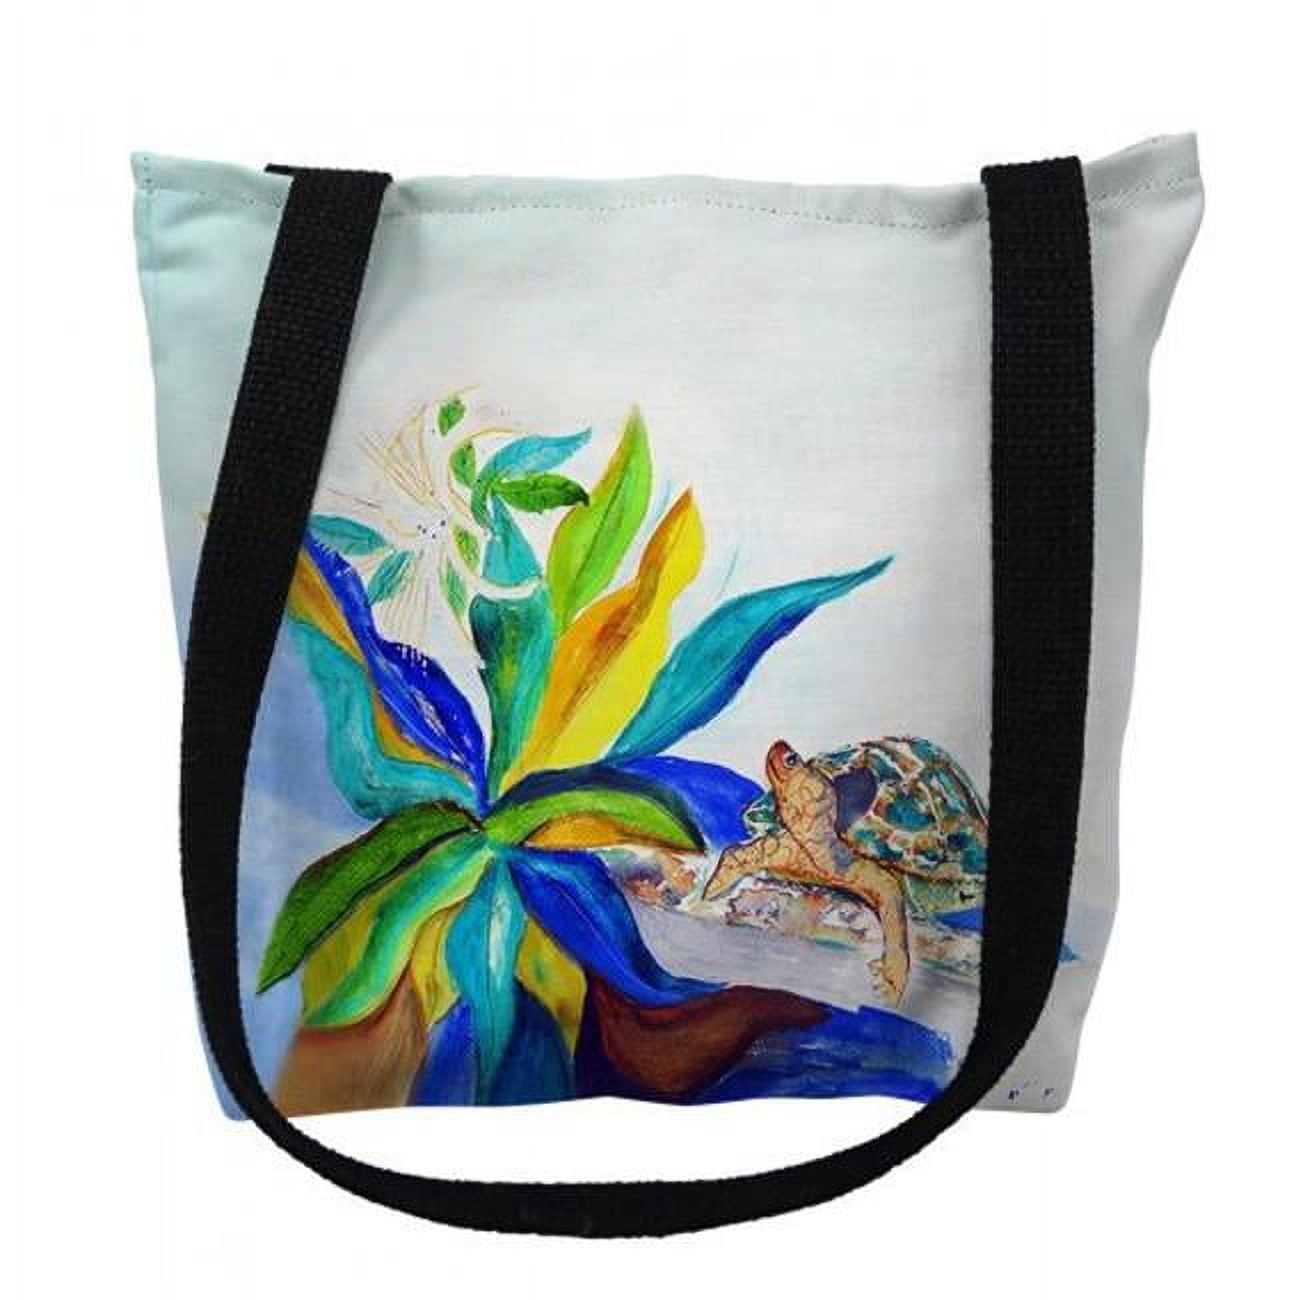 Ty1071m 16 X 16 In. Turtle & Lily Tote Bag - Medium